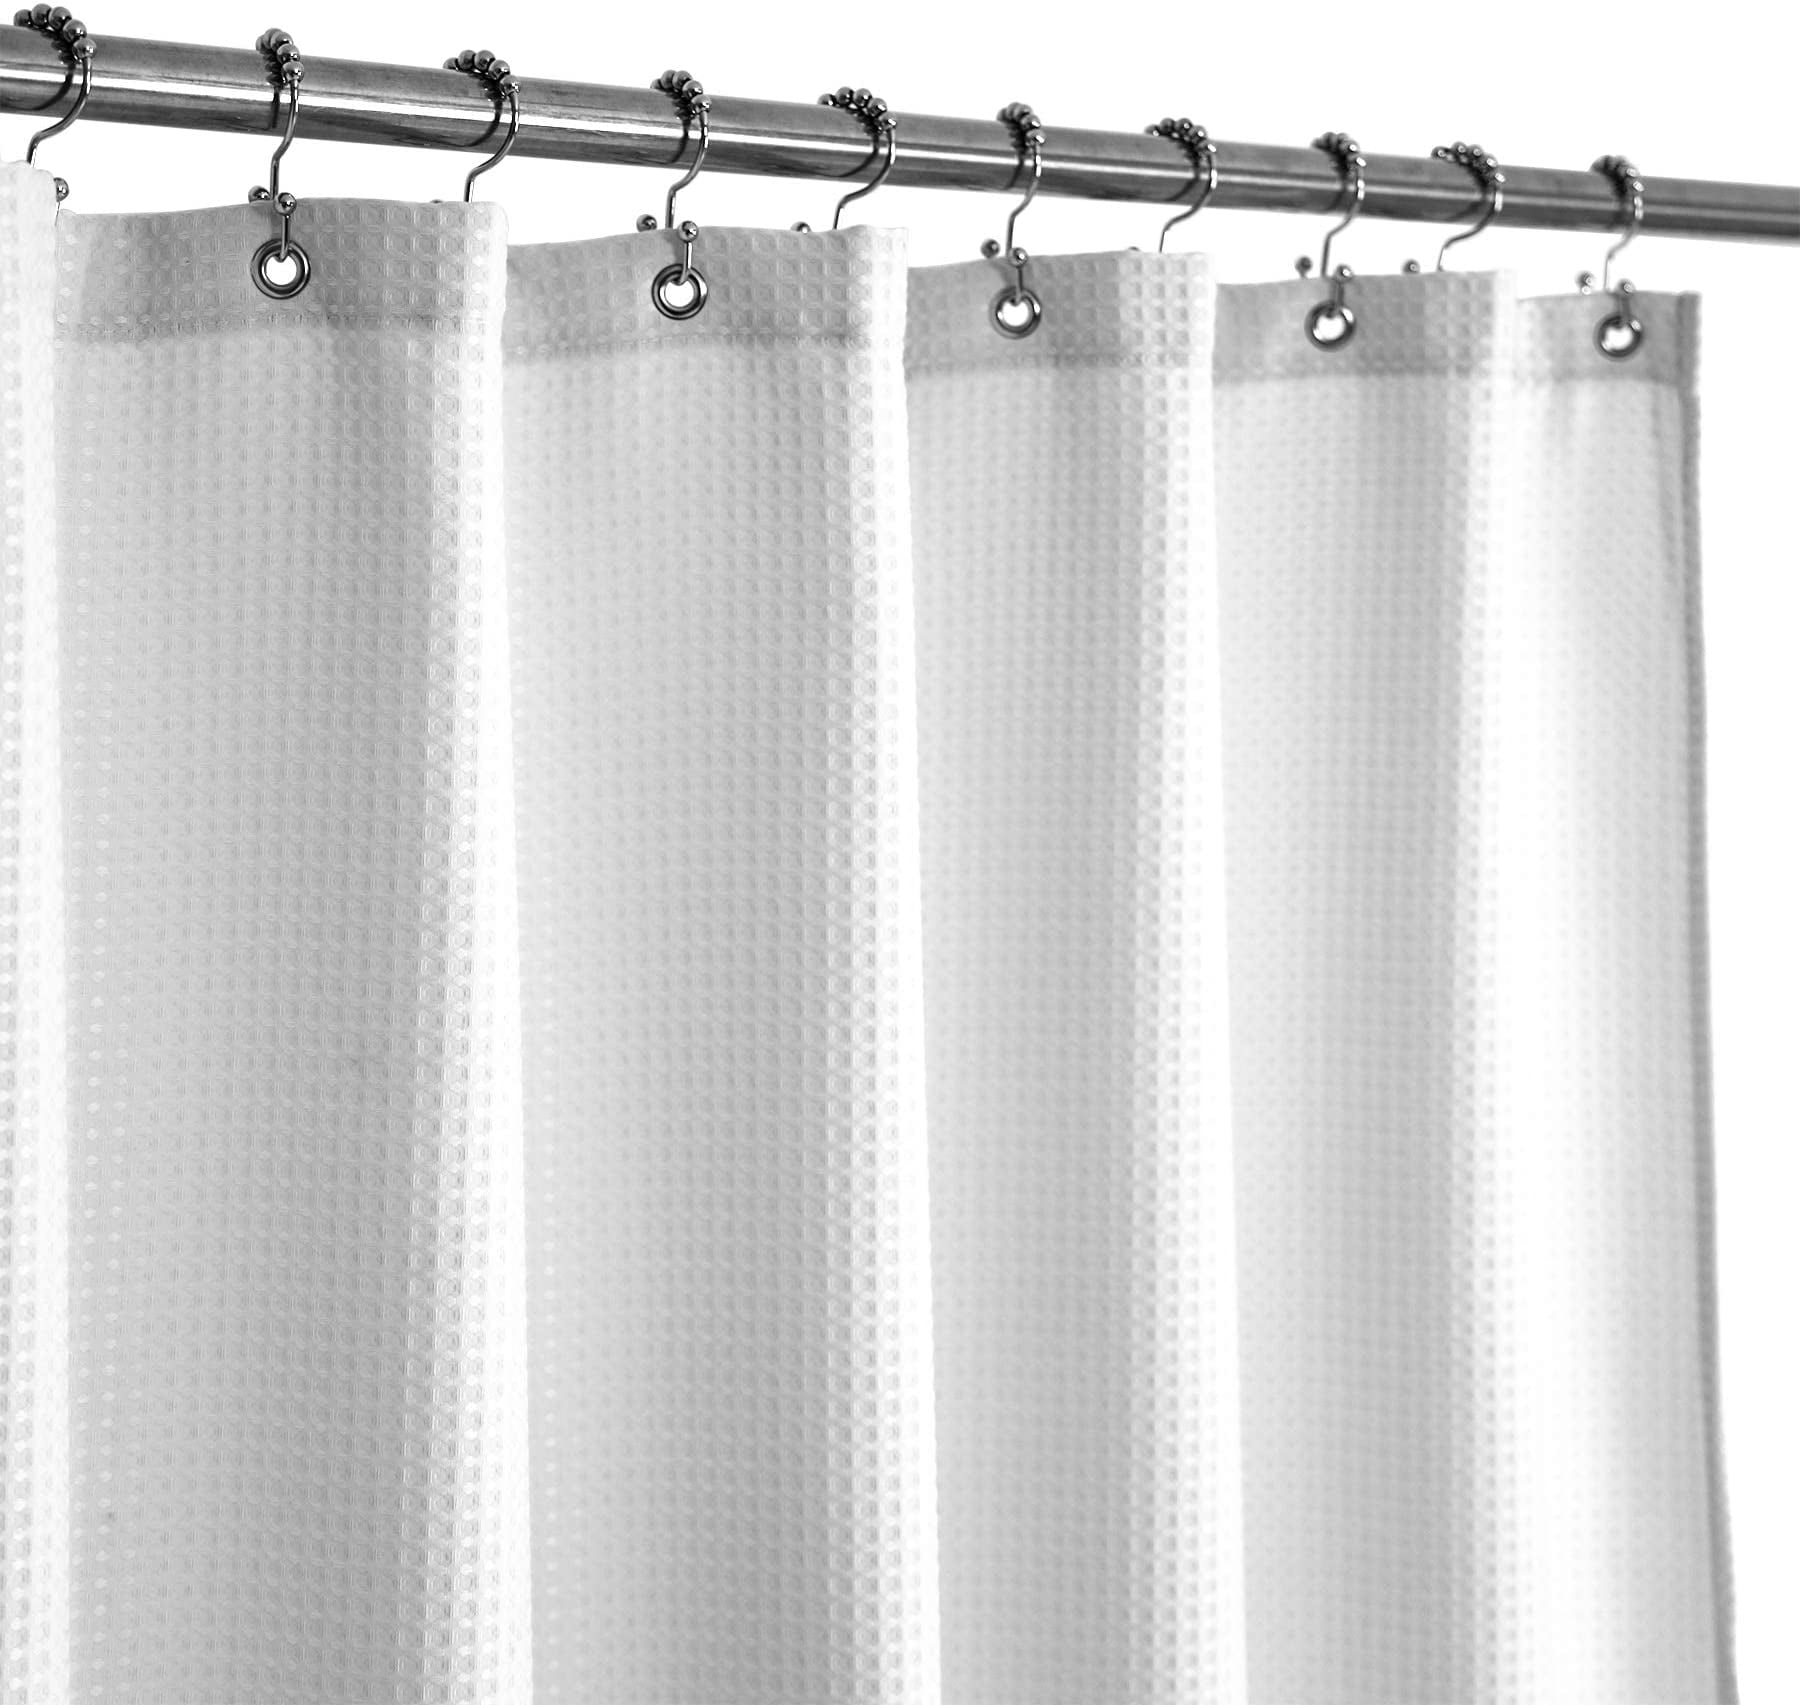 Rv Shower Curtain For Camper Trailer Camping Bathroom 47x64 Inches Hotel Quality 